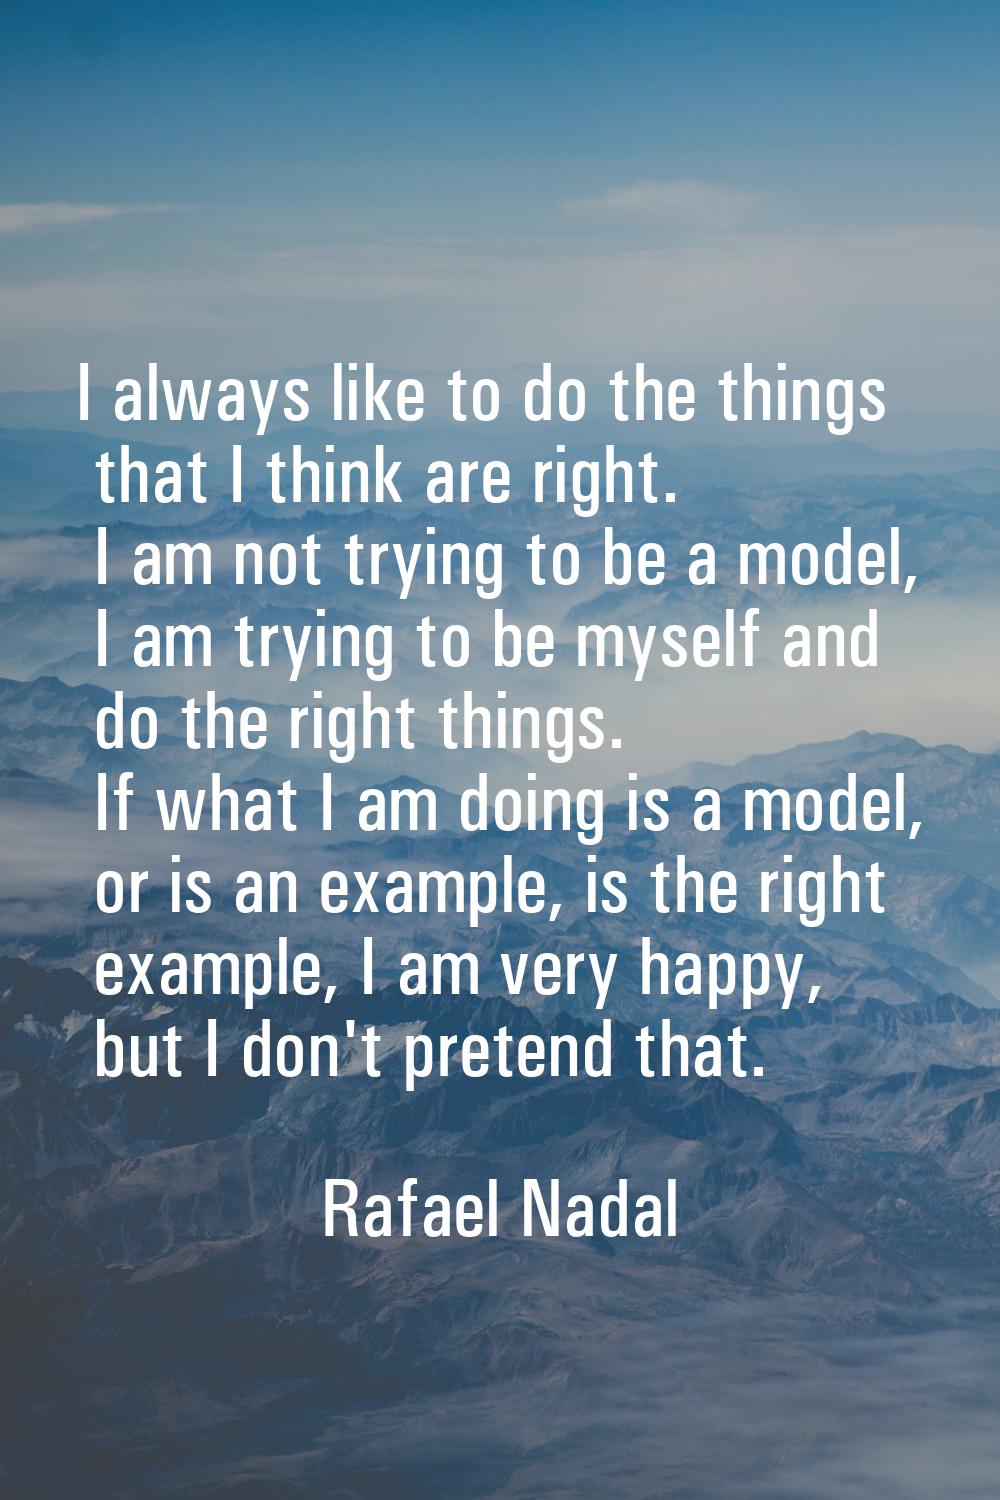 I always like to do the things that I think are right. I am not trying to be a model, I am trying t